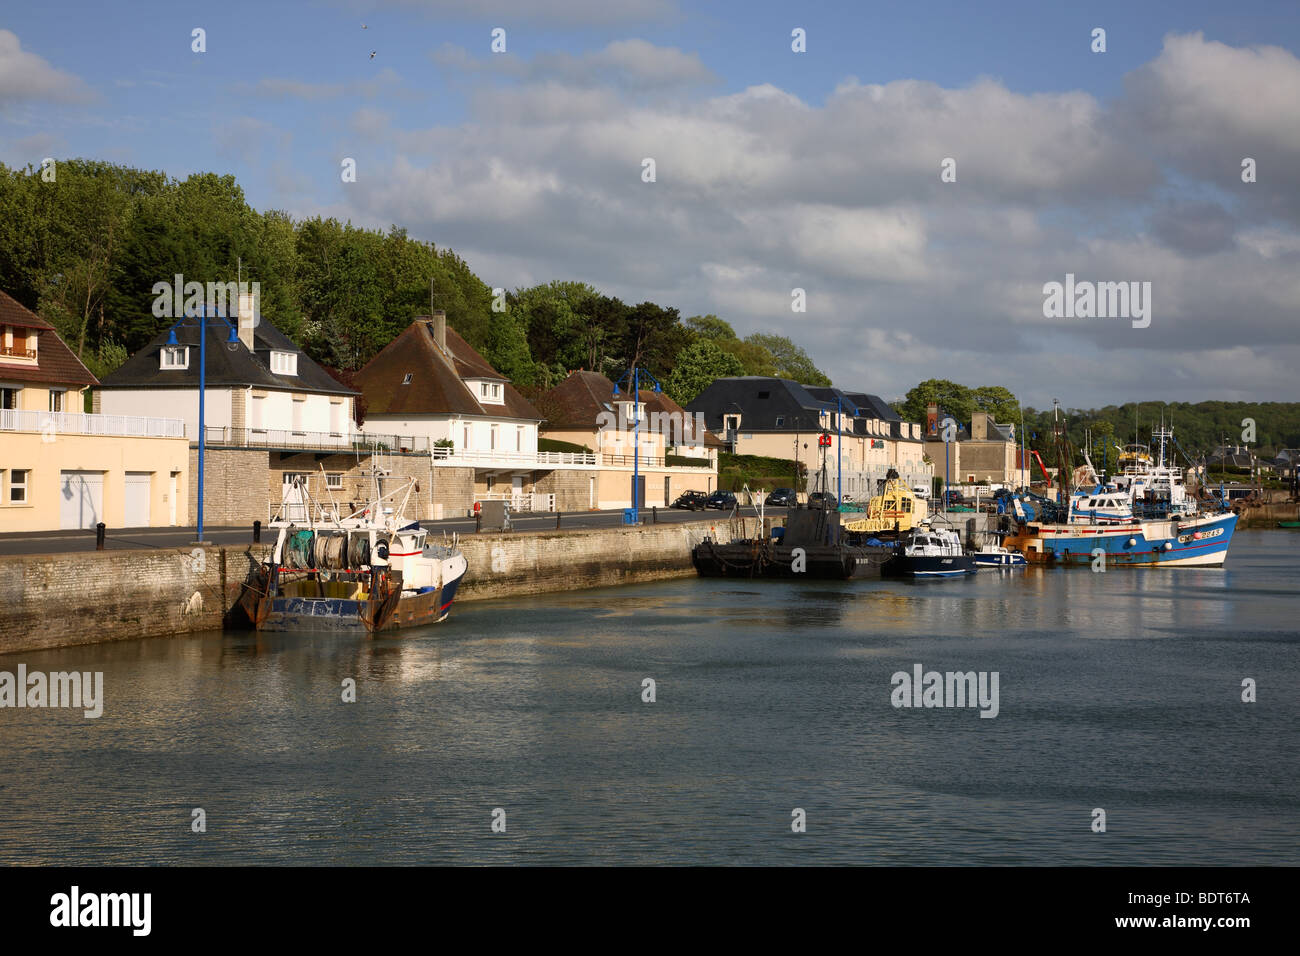 The quay in the inner canal with fishing boats in Port-en-Bessin, Calvados, in Normandy, France at sunset. Stock Photo